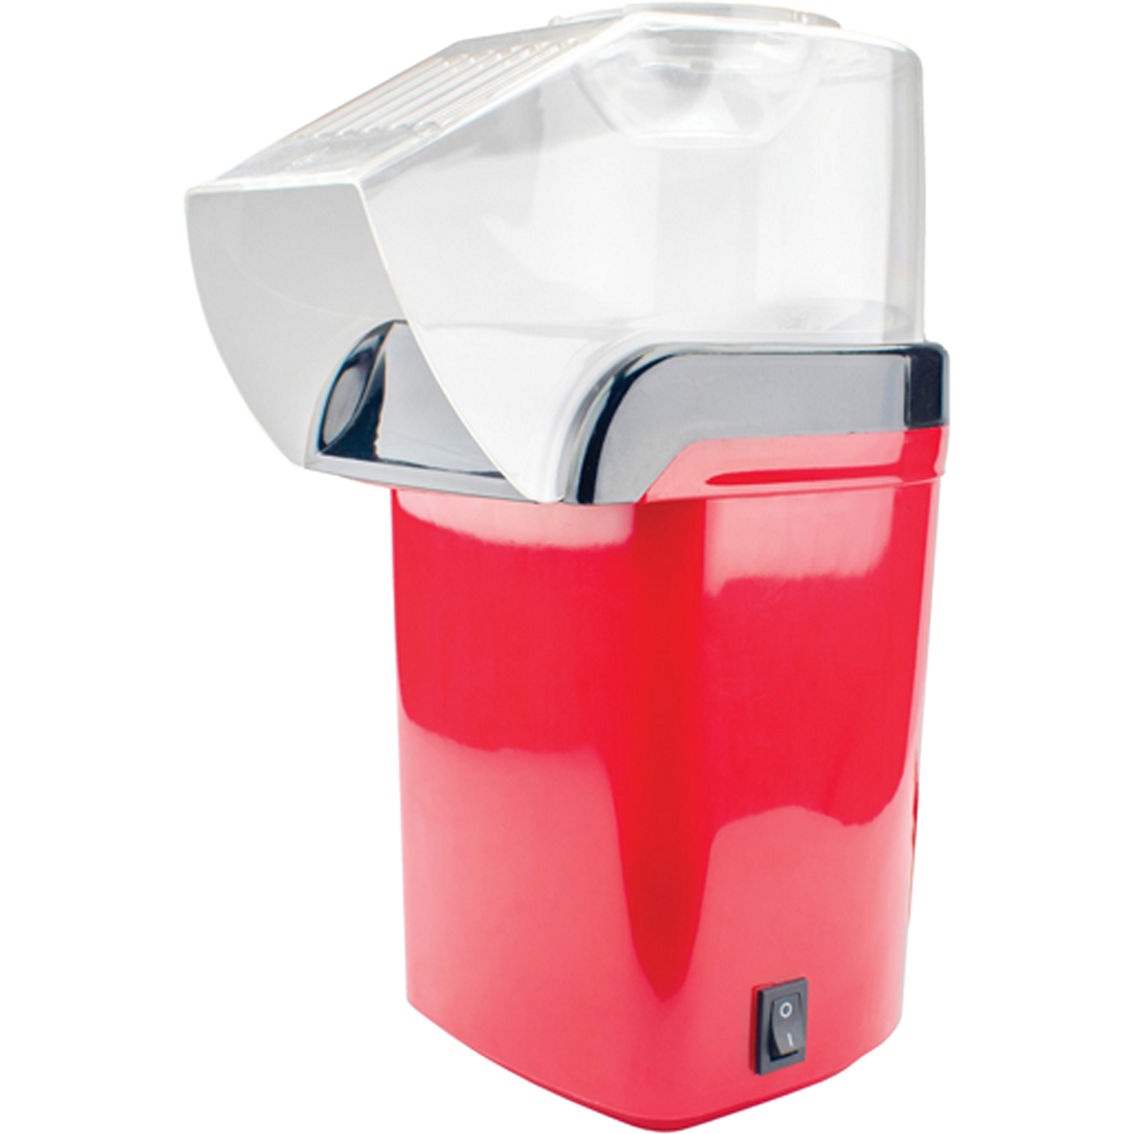 Brentwood 8 Cup Red Hot Air Popcorn Maker - Image 2 of 6